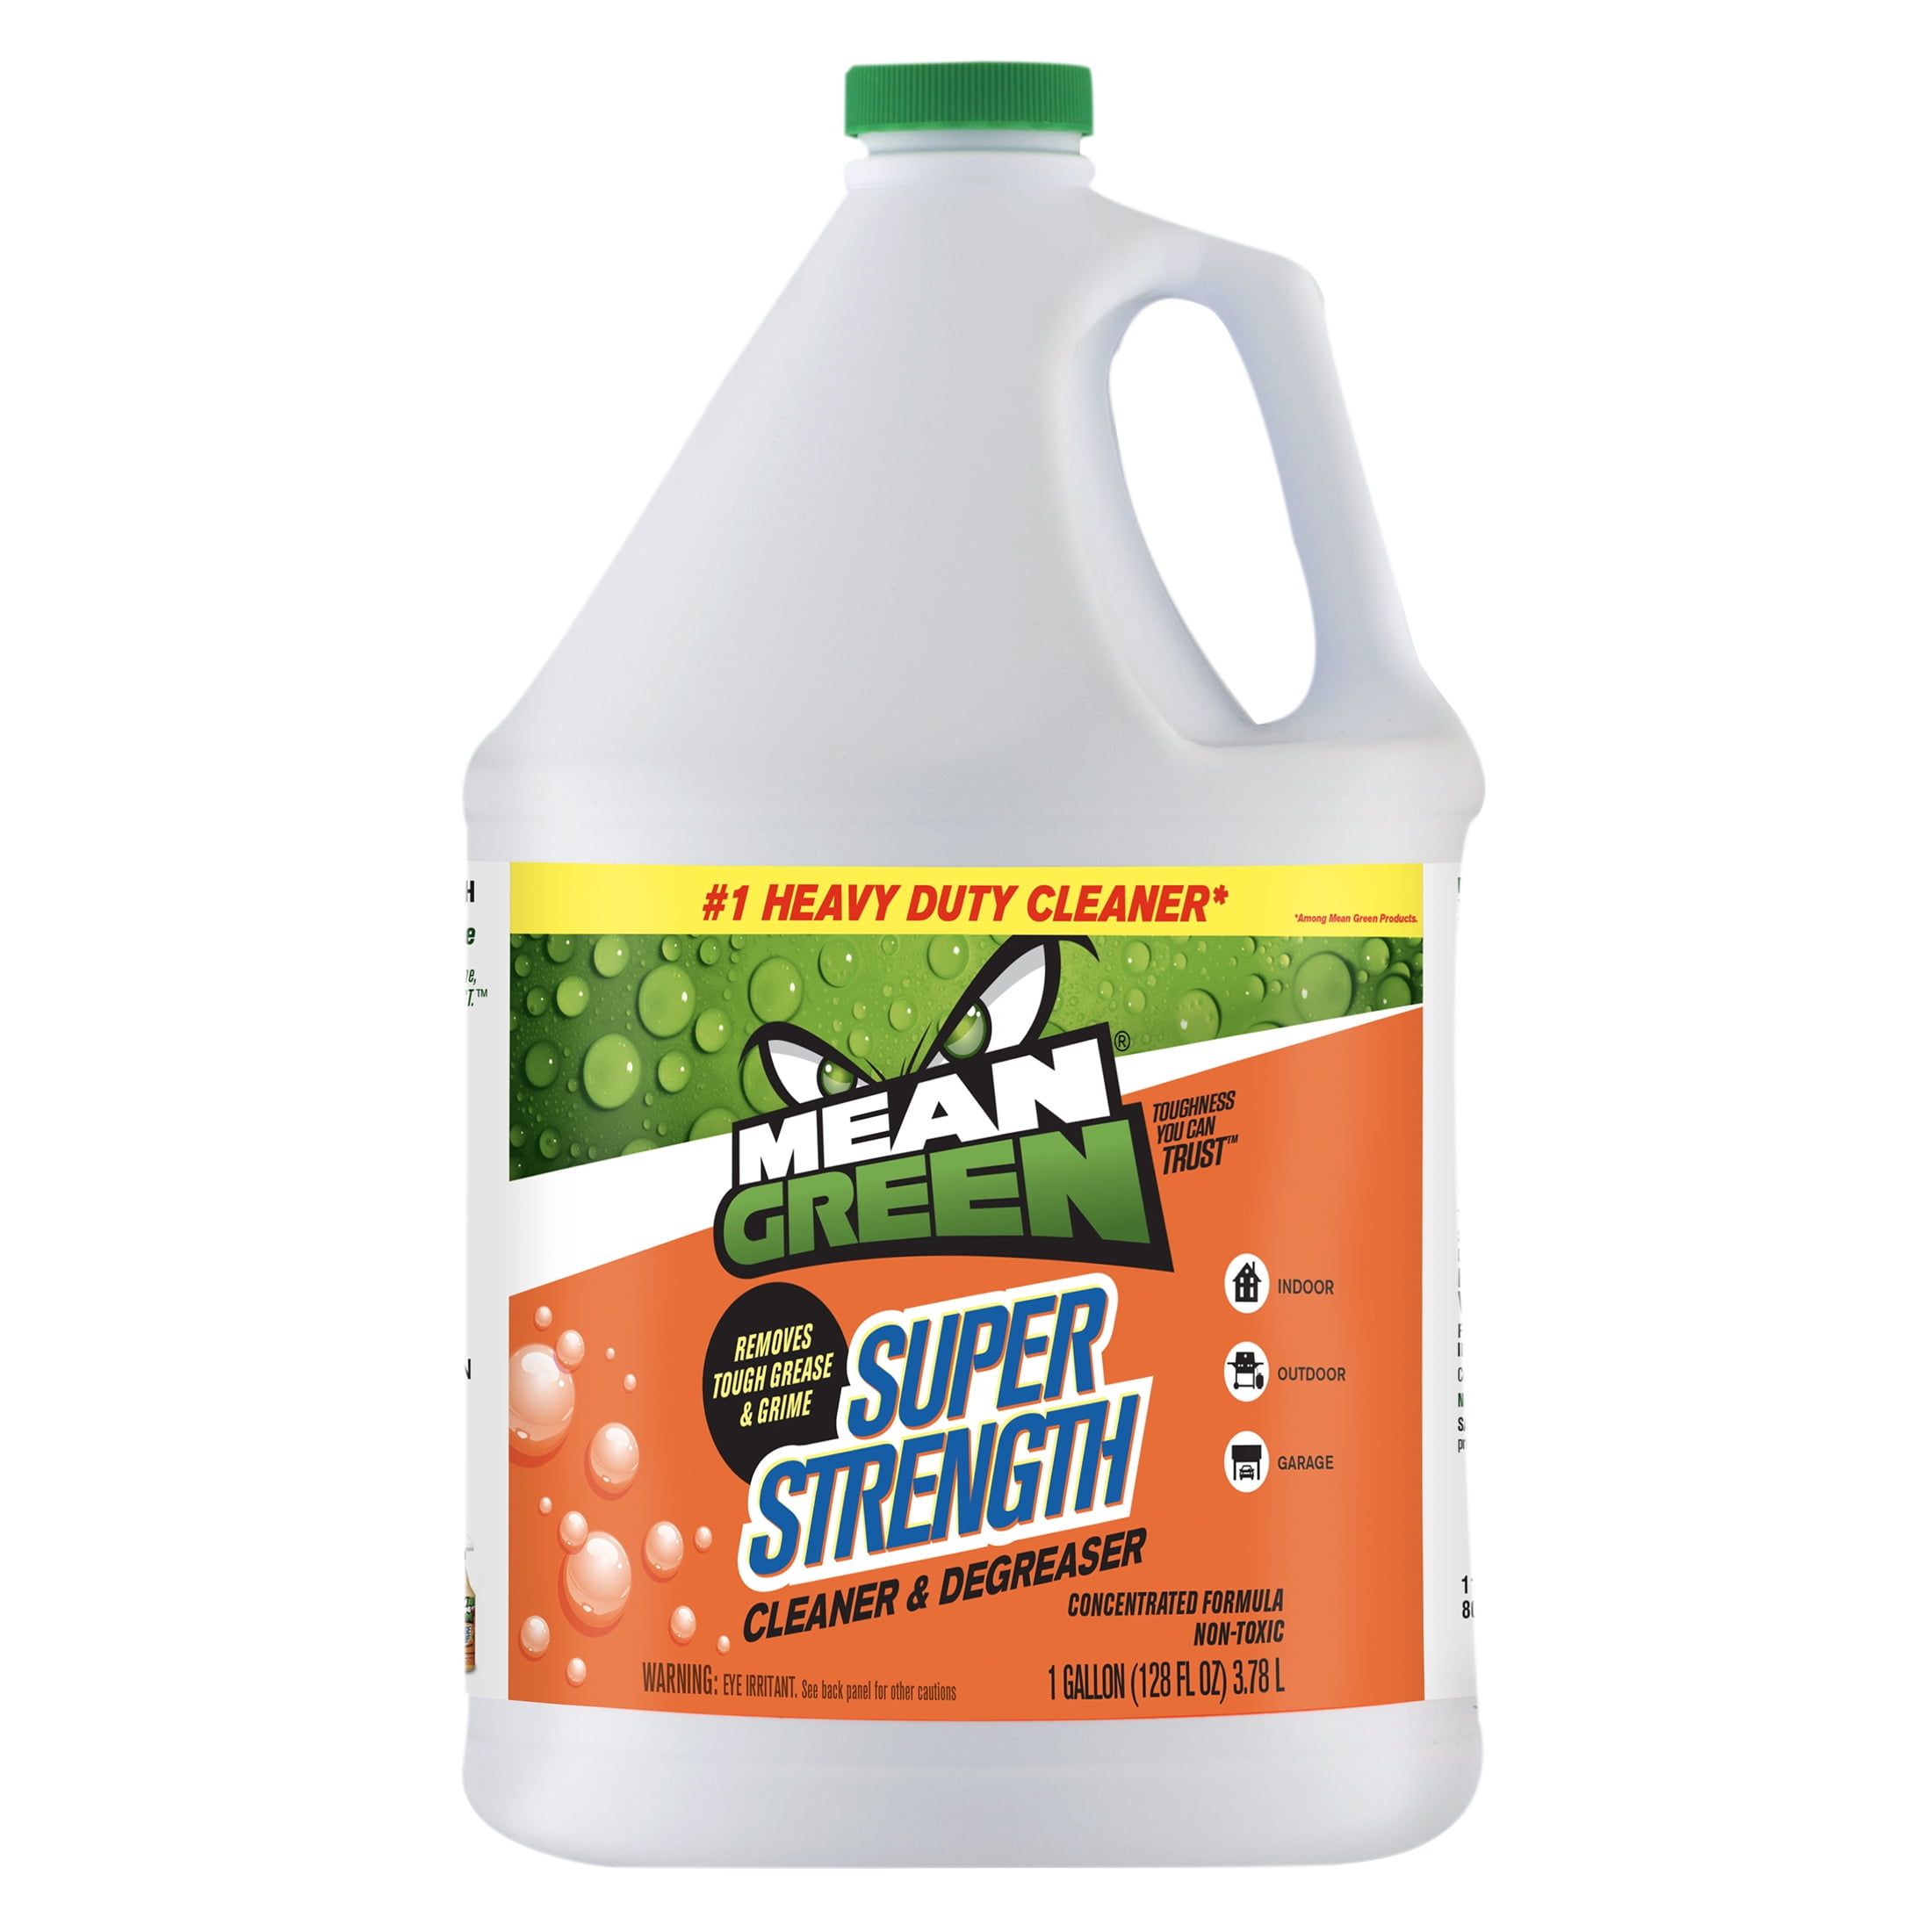 Mean Green Super Strength Cleaner & Degreaser, 128 Ounce 